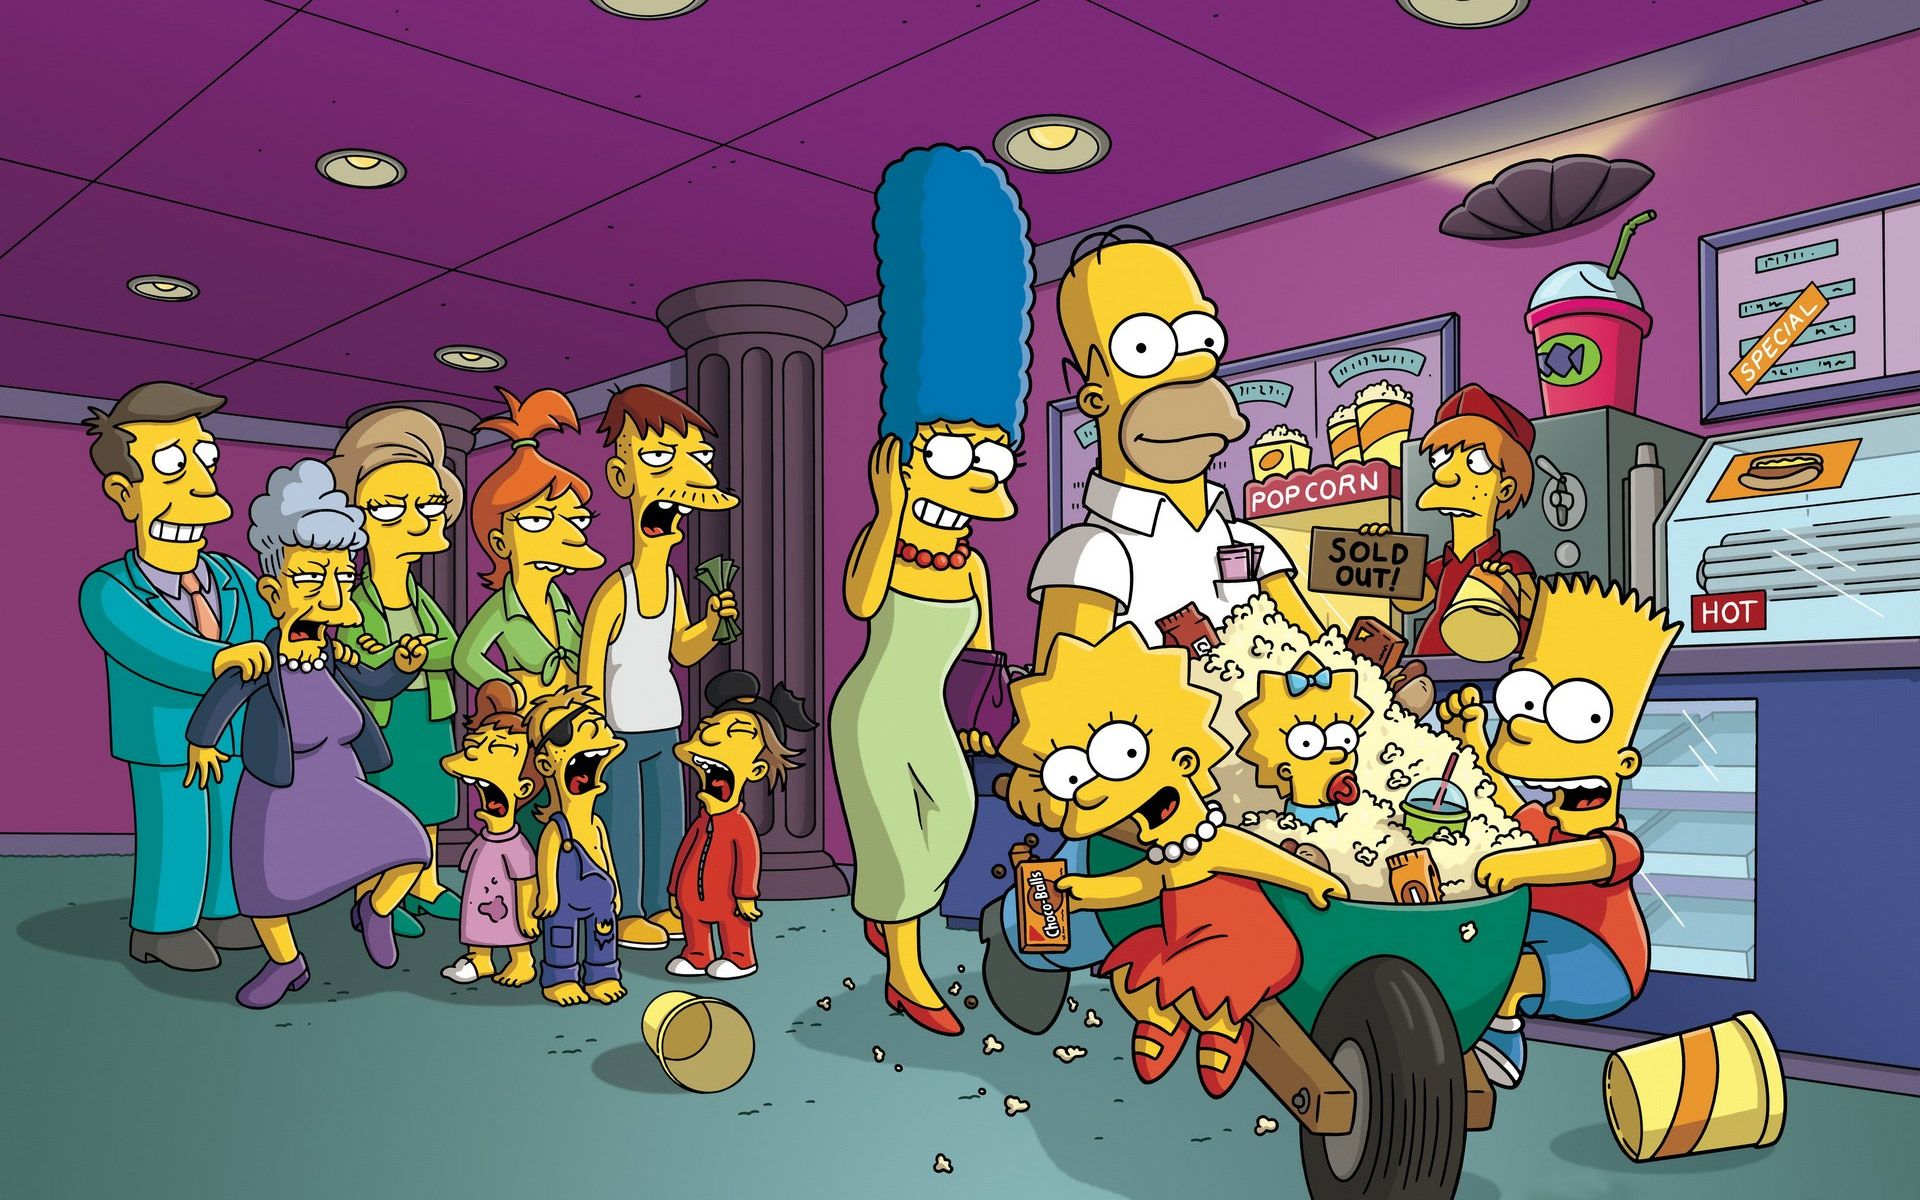 The simpsons are standing in a room with people - The Simpsons